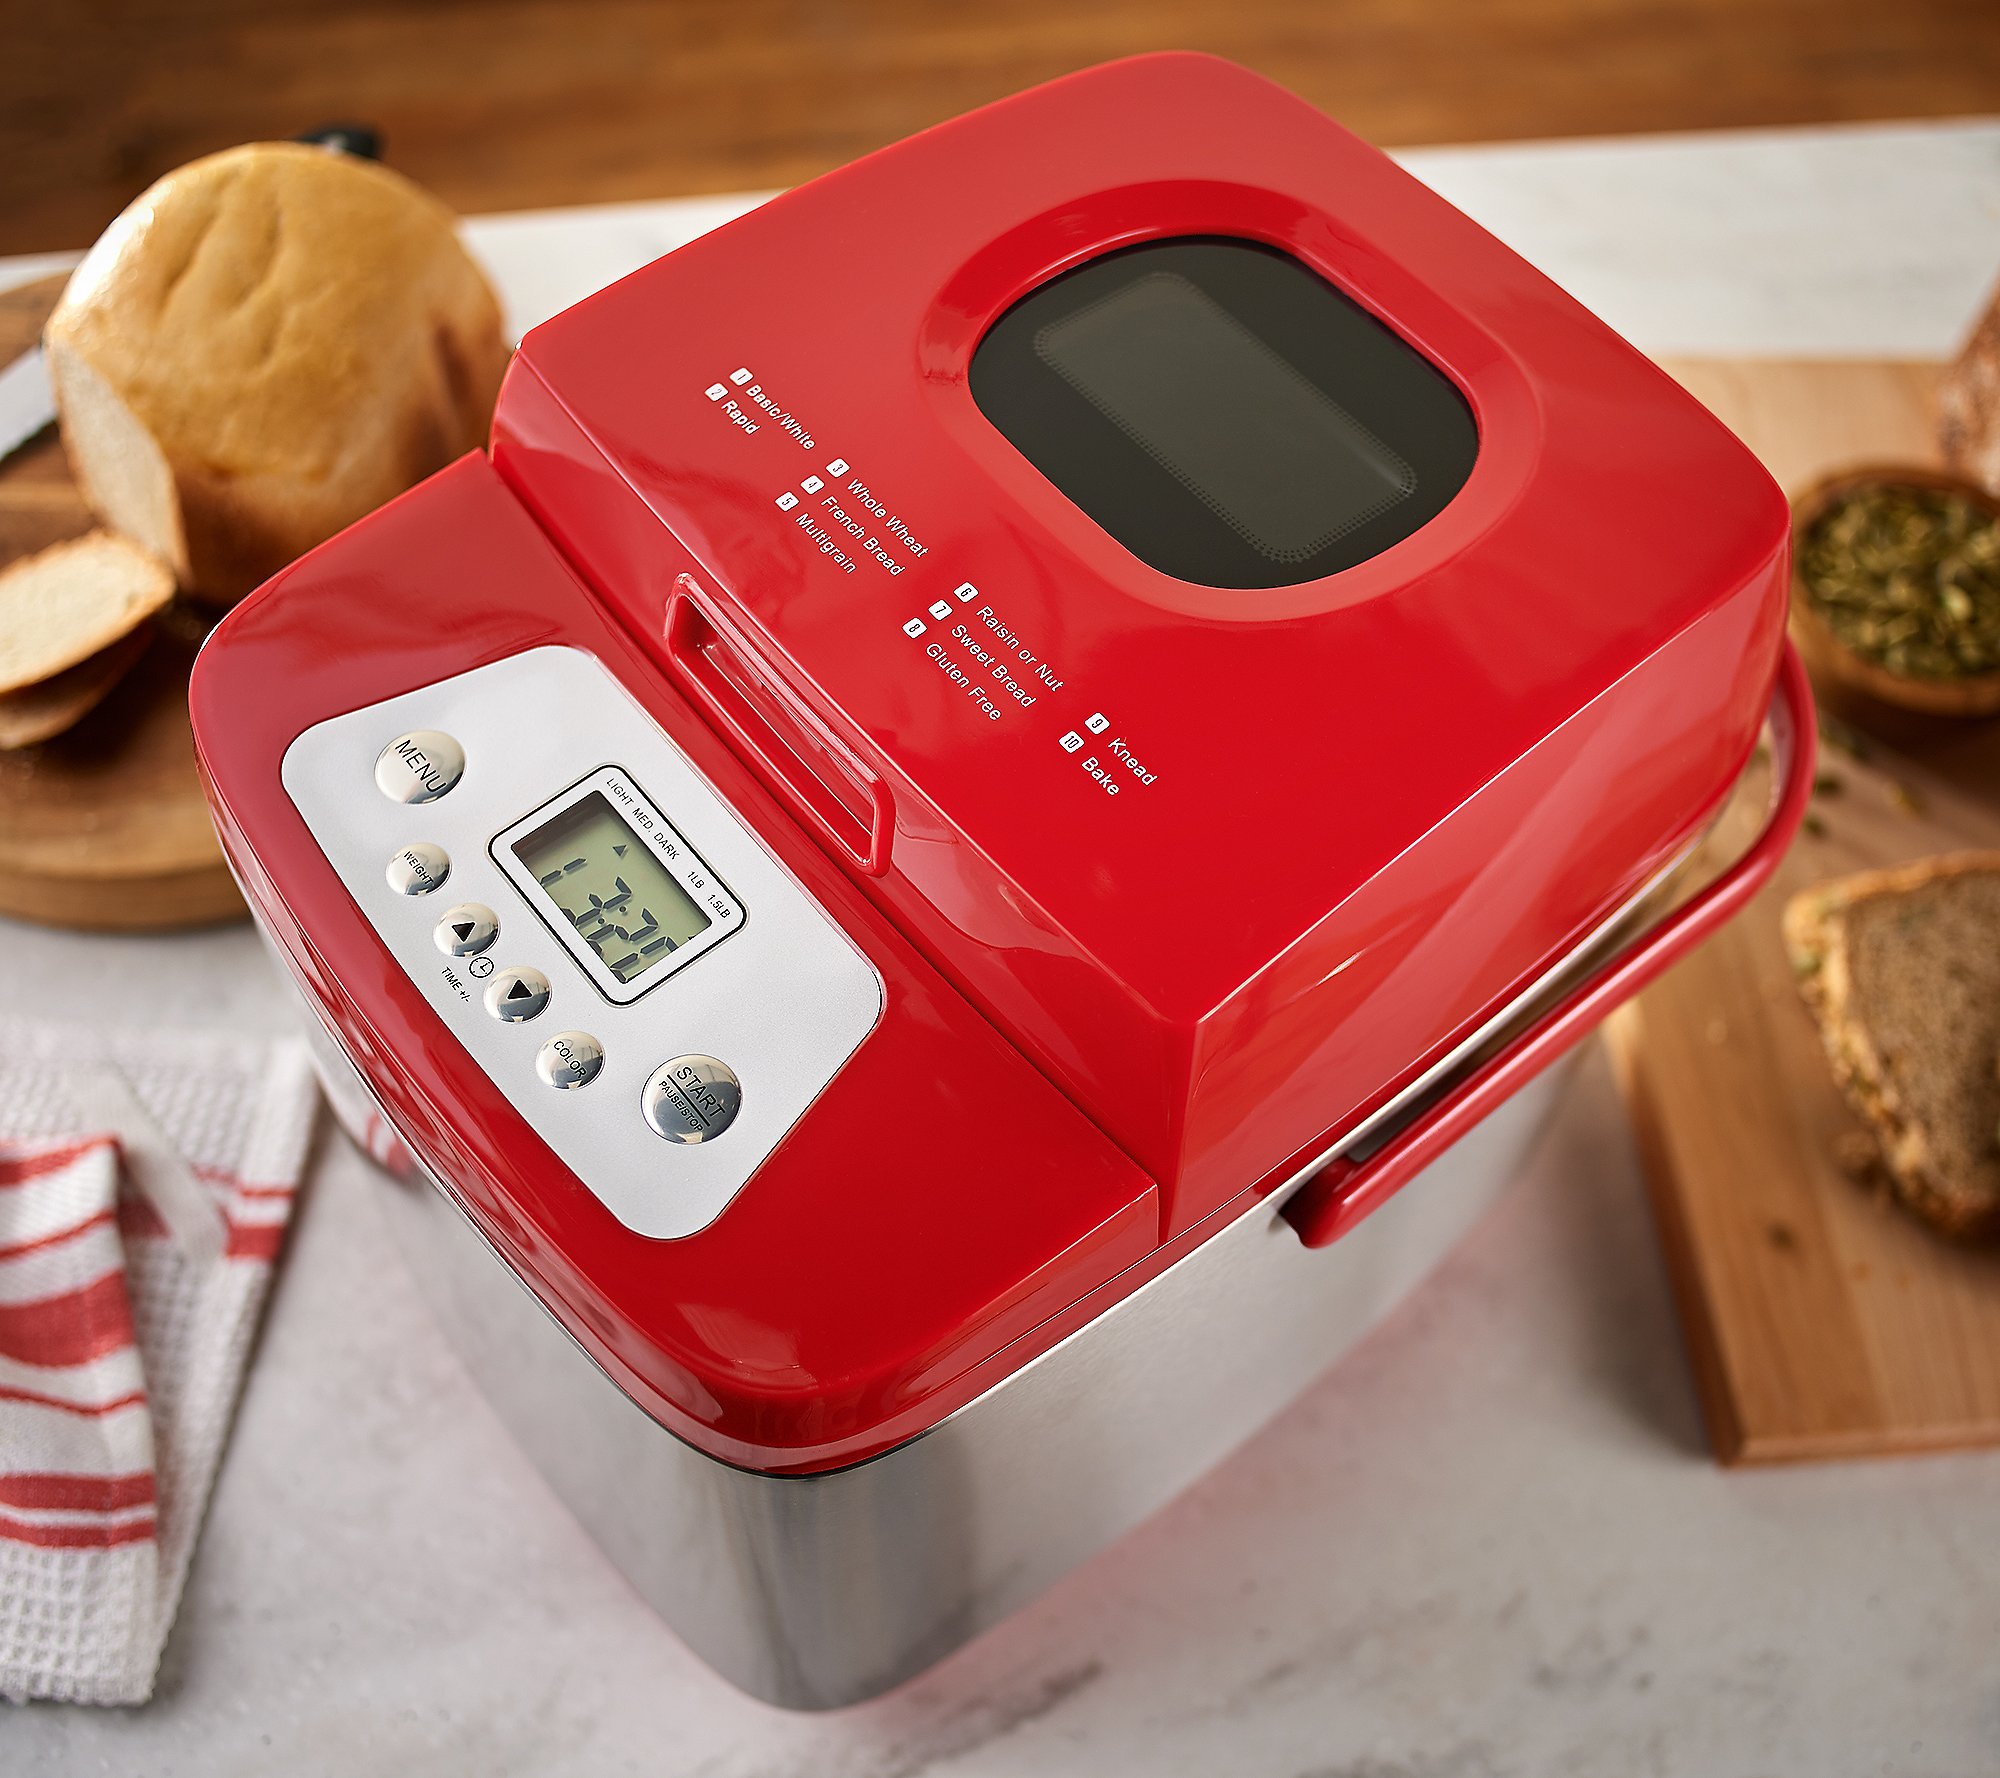 Cook’s Essentials 1.5-lb Stainless Steel Breadmaker for $19.93